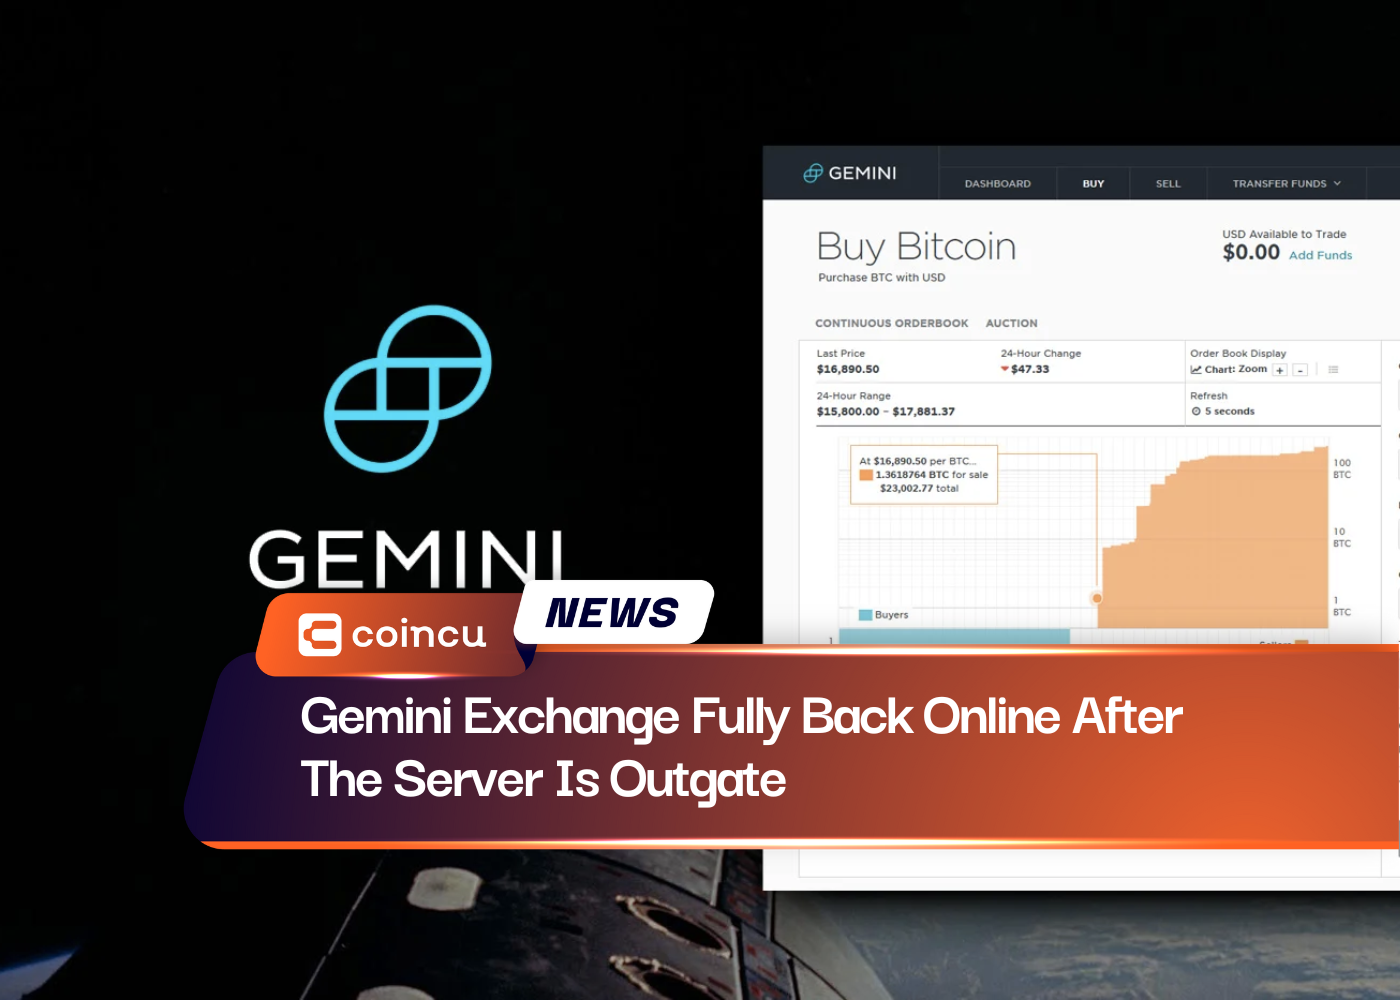 Gemini Exchange Fully Back Online After The Server Is Outgate